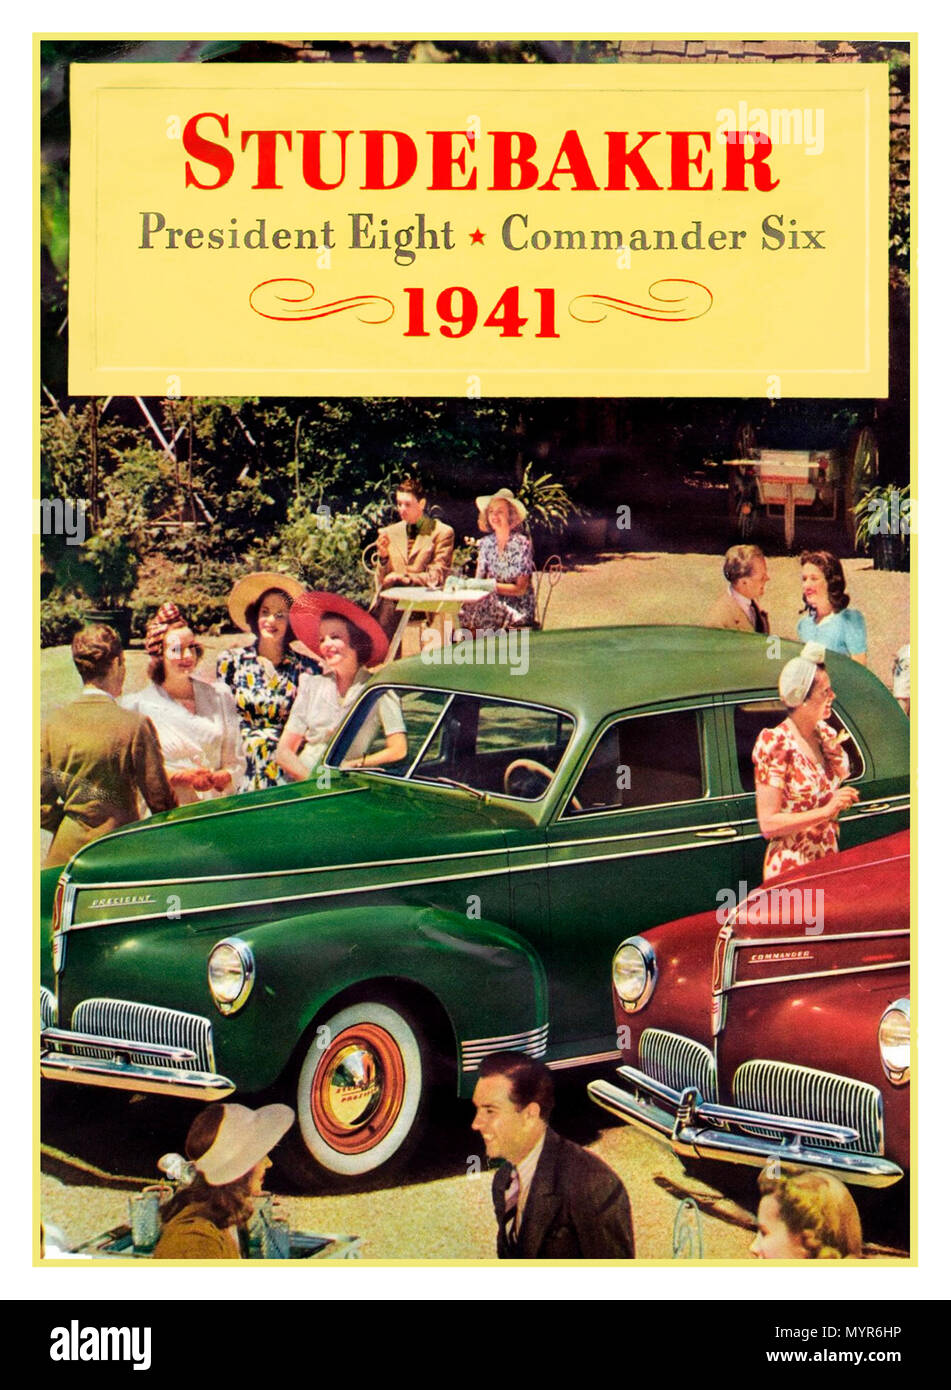 STUDEBAKER Vintage 1941 American Automobile poster press advertisement for "The Studebaker President Eight" 'Commander Six'  the premier automobile model manufactured by the Studebaker Corporation of South Bend, Indiana (US) from 1926-1942, the President received a new body style, a four-door sedan with rear-opening rear doors Stock Photo